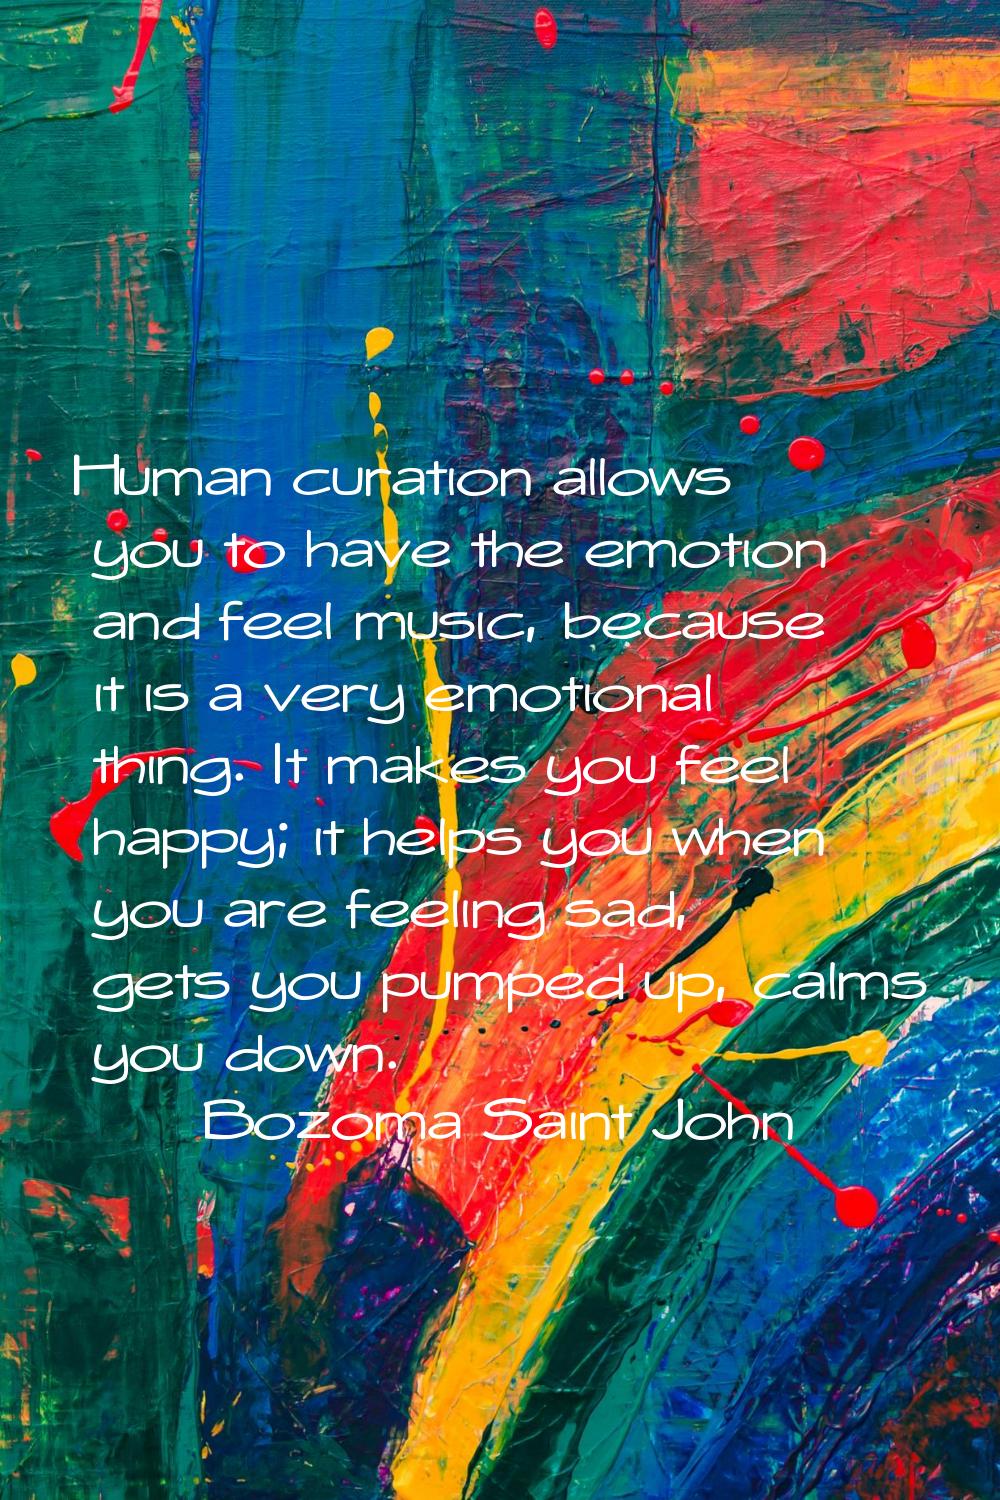 Human curation allows you to have the emotion and feel music, because it is a very emotional thing.